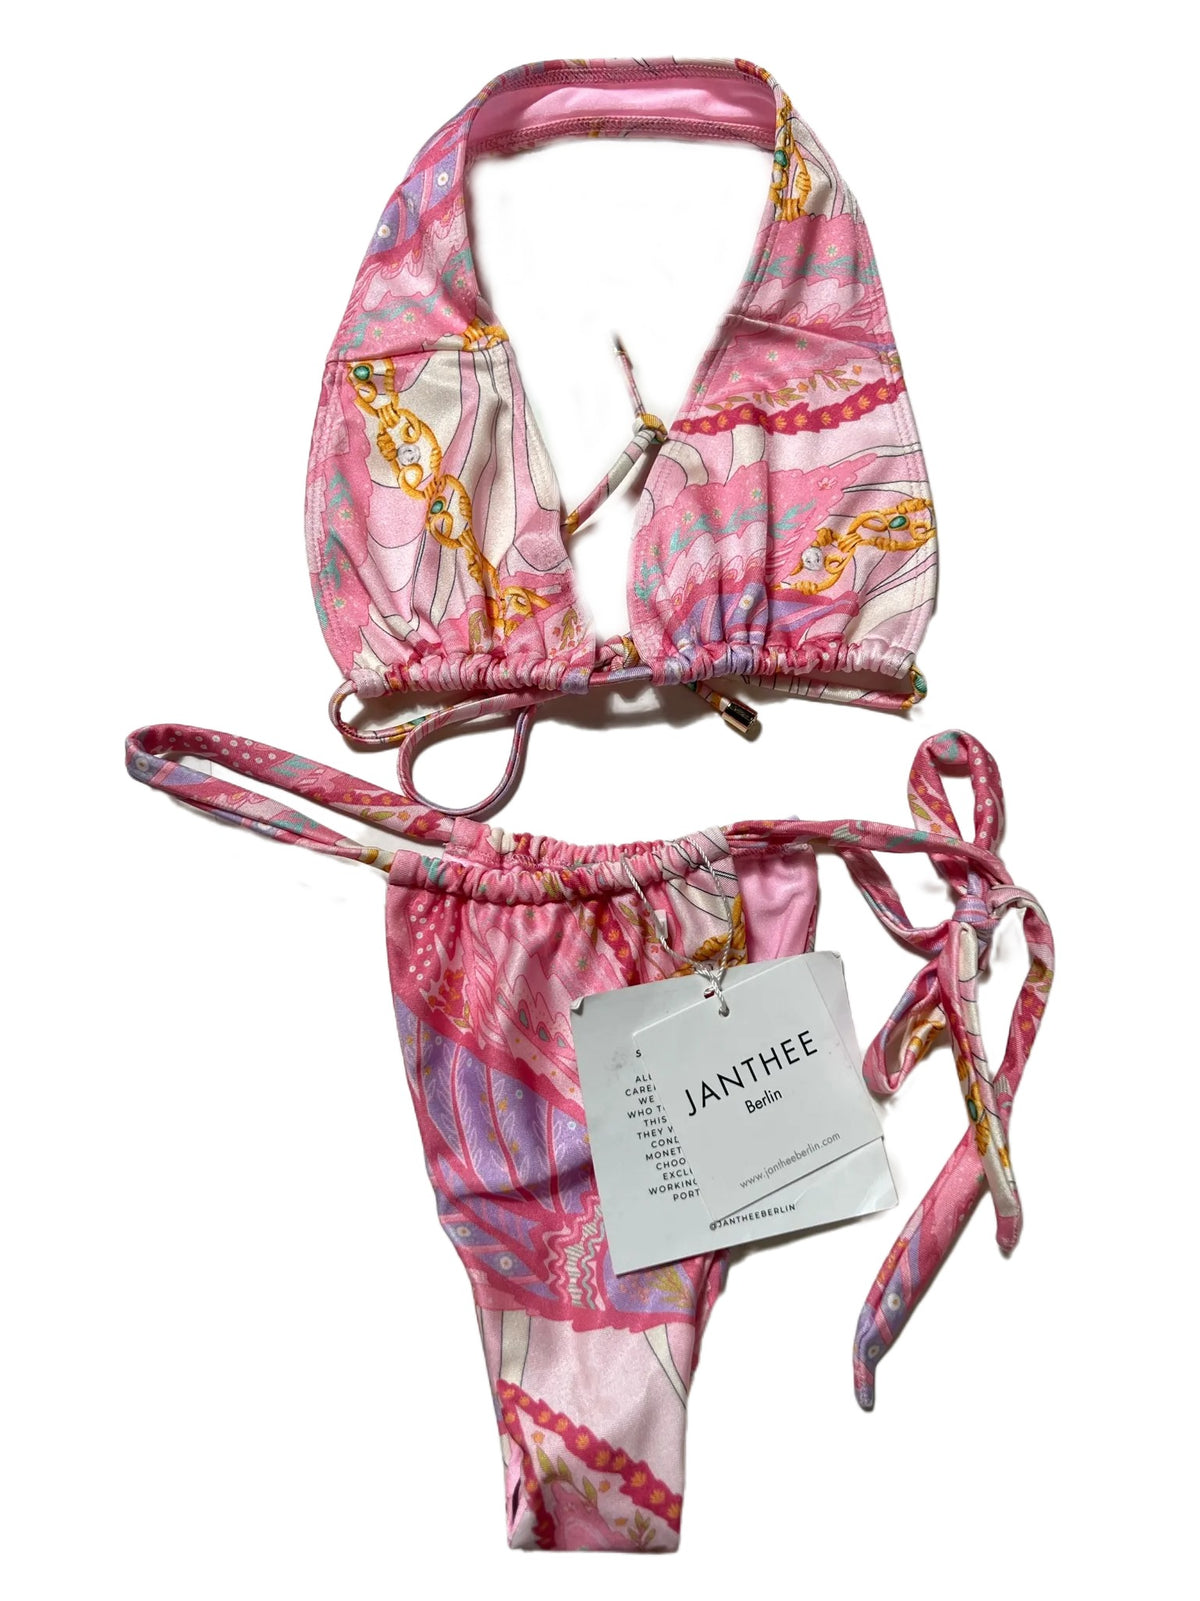 Janthee- Pink Halter Bikini - NEW WITH TAGS